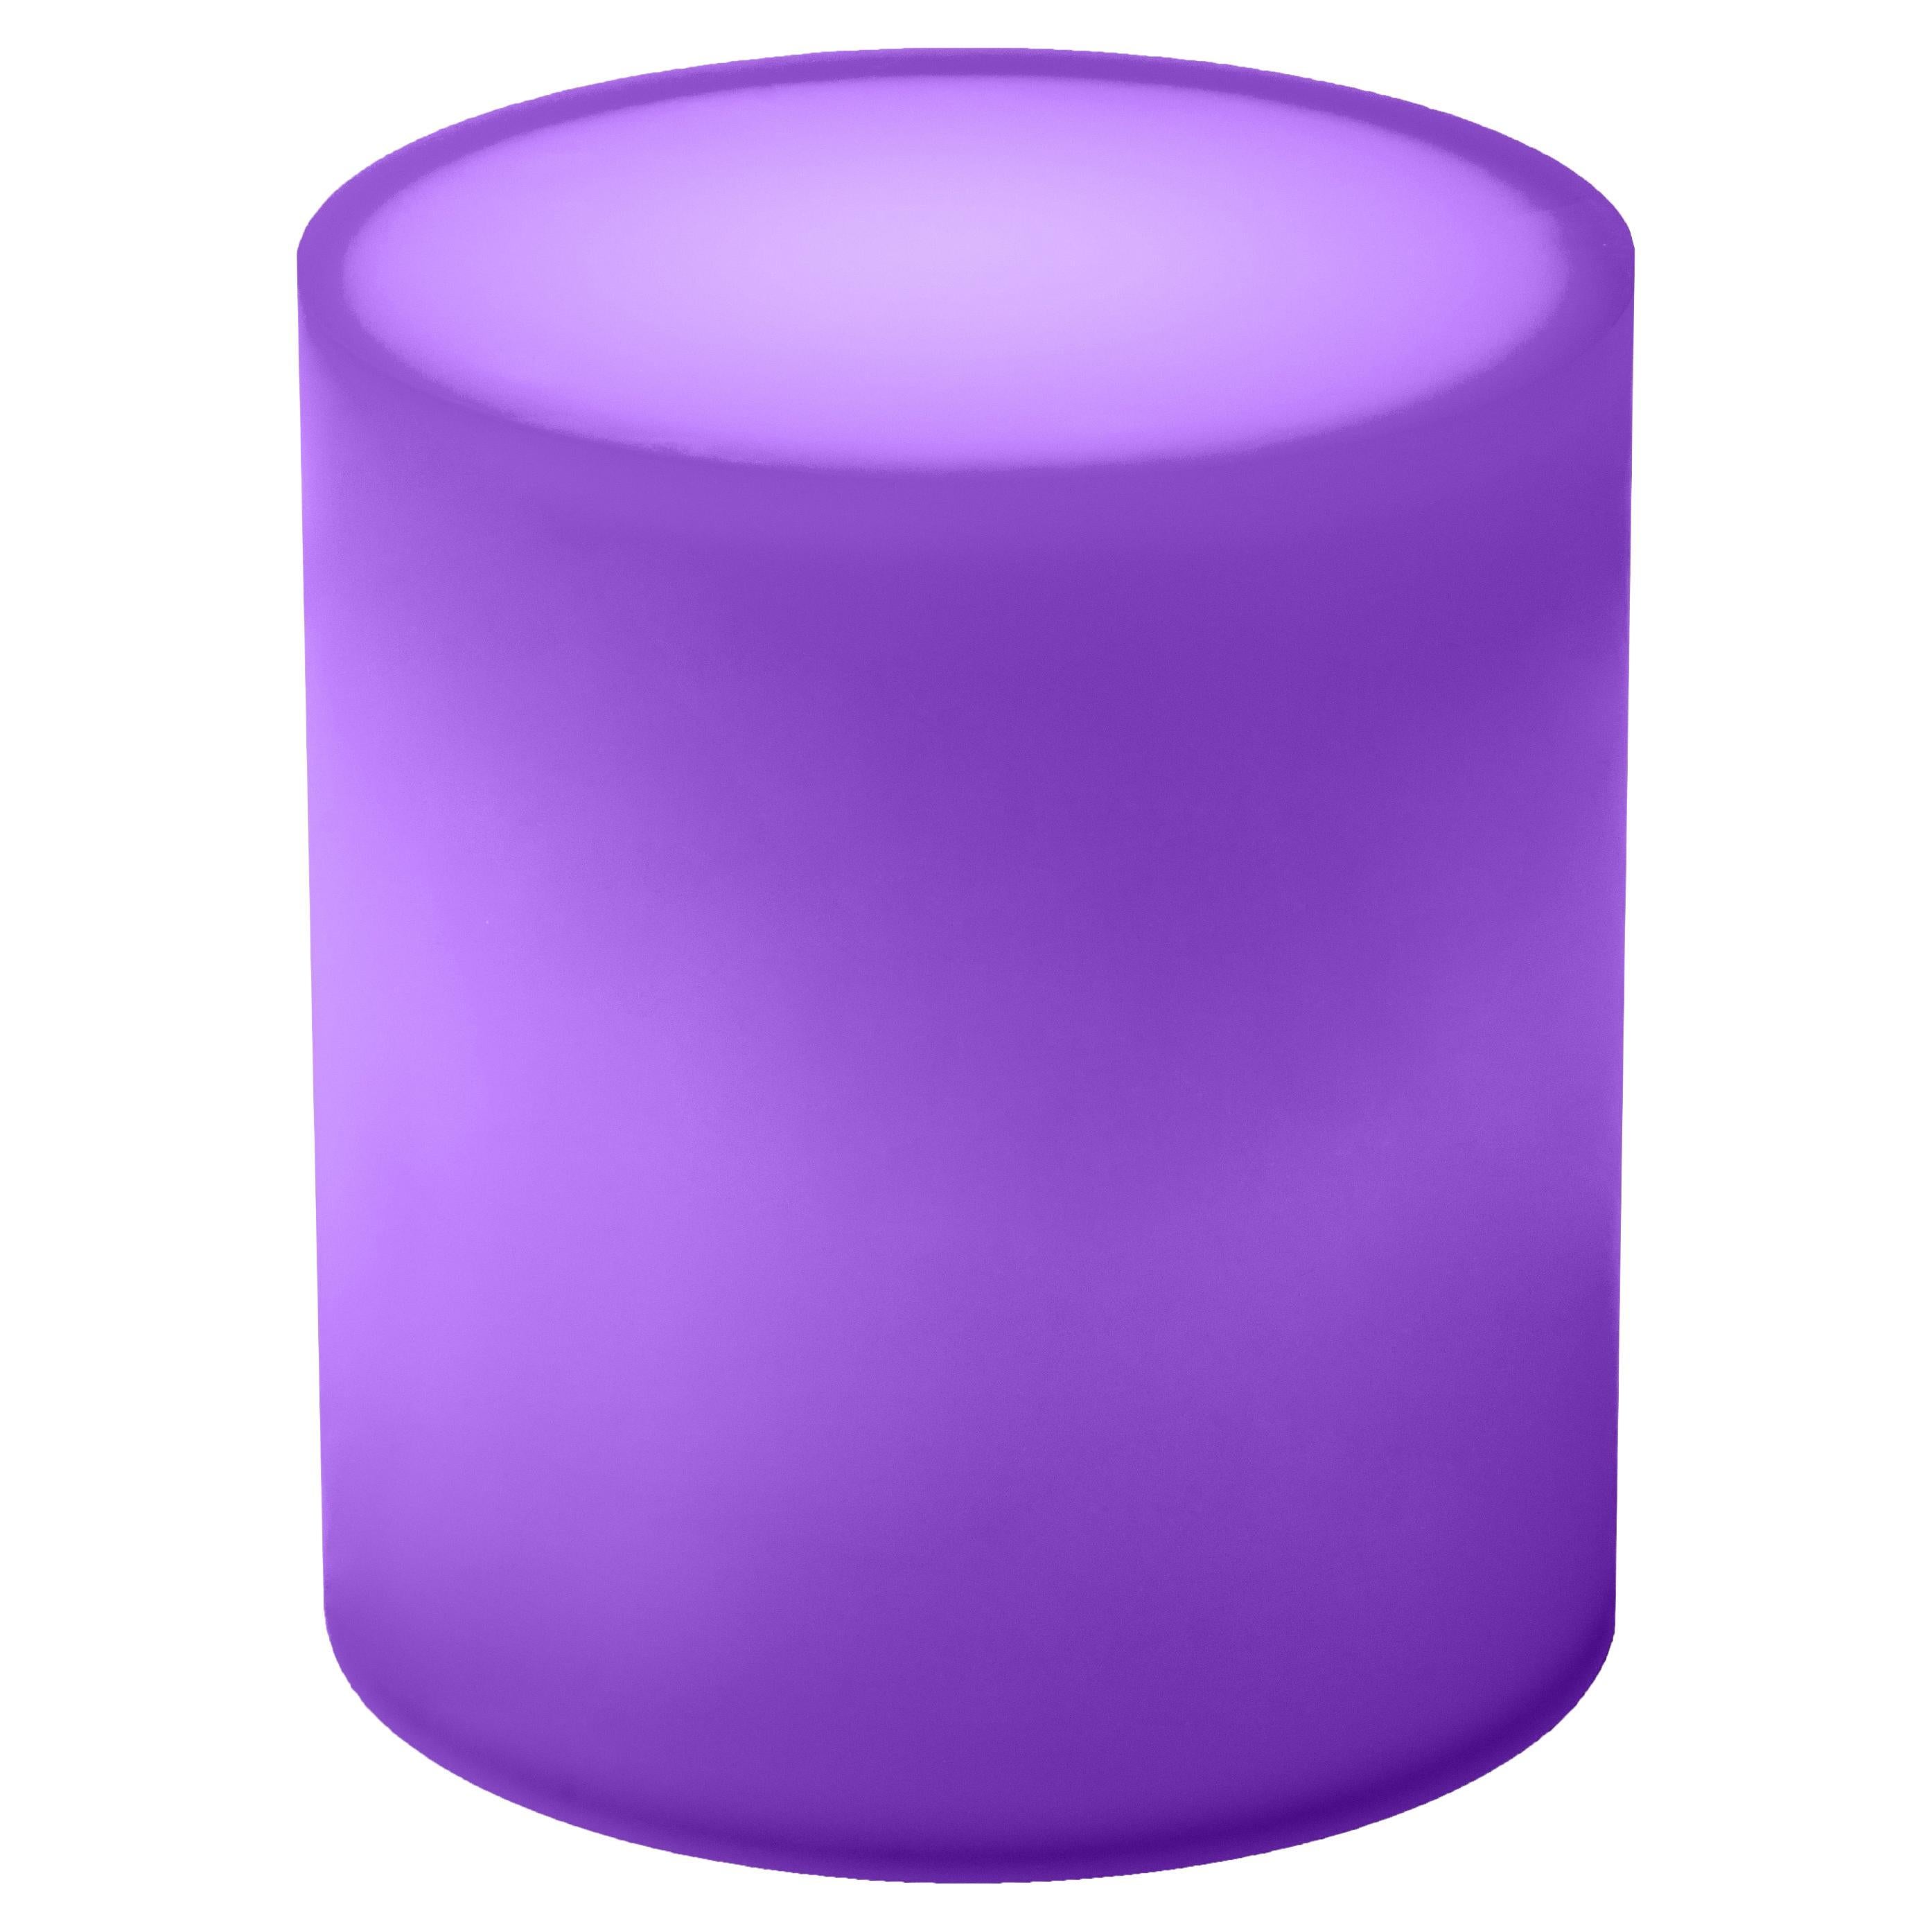 Drum Resin Side Table/Stool In Purple by Facture, Represented by Tuleste Factory For Sale